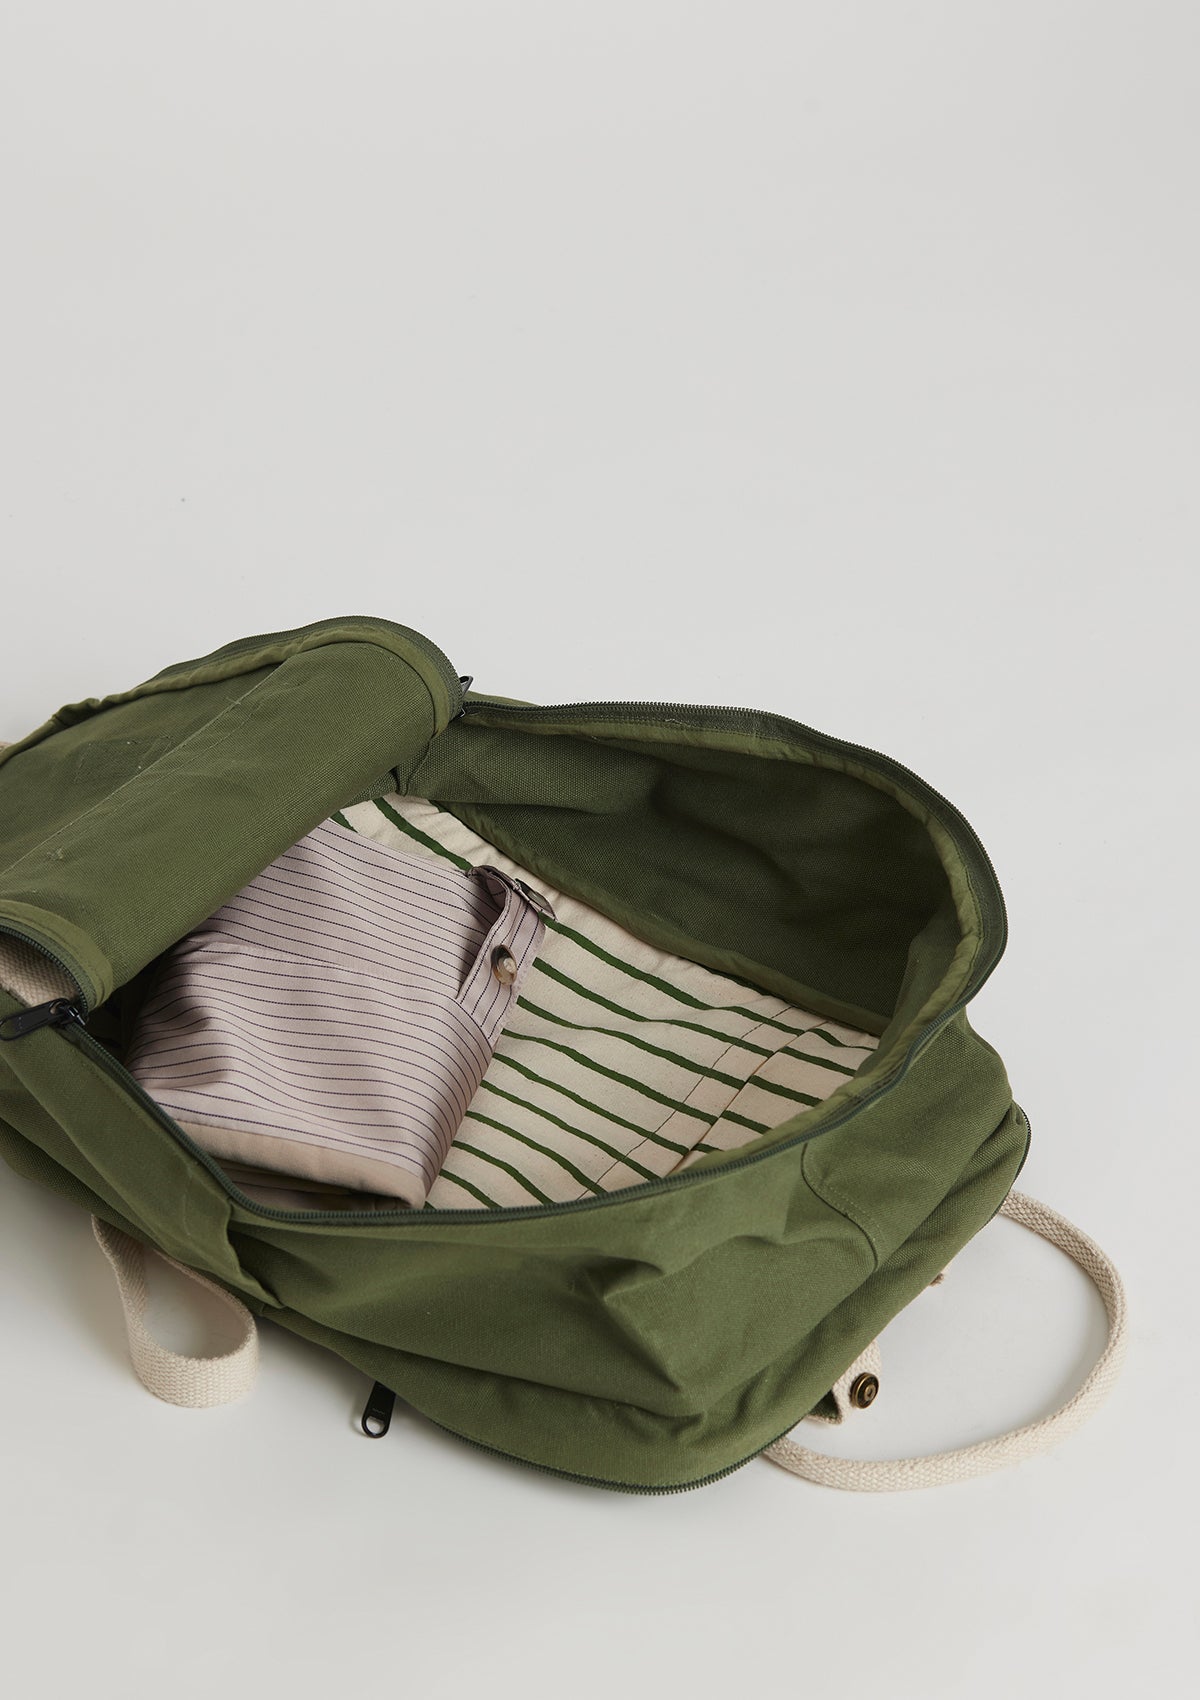 Laptop Bag with Separate Storage Compartments 